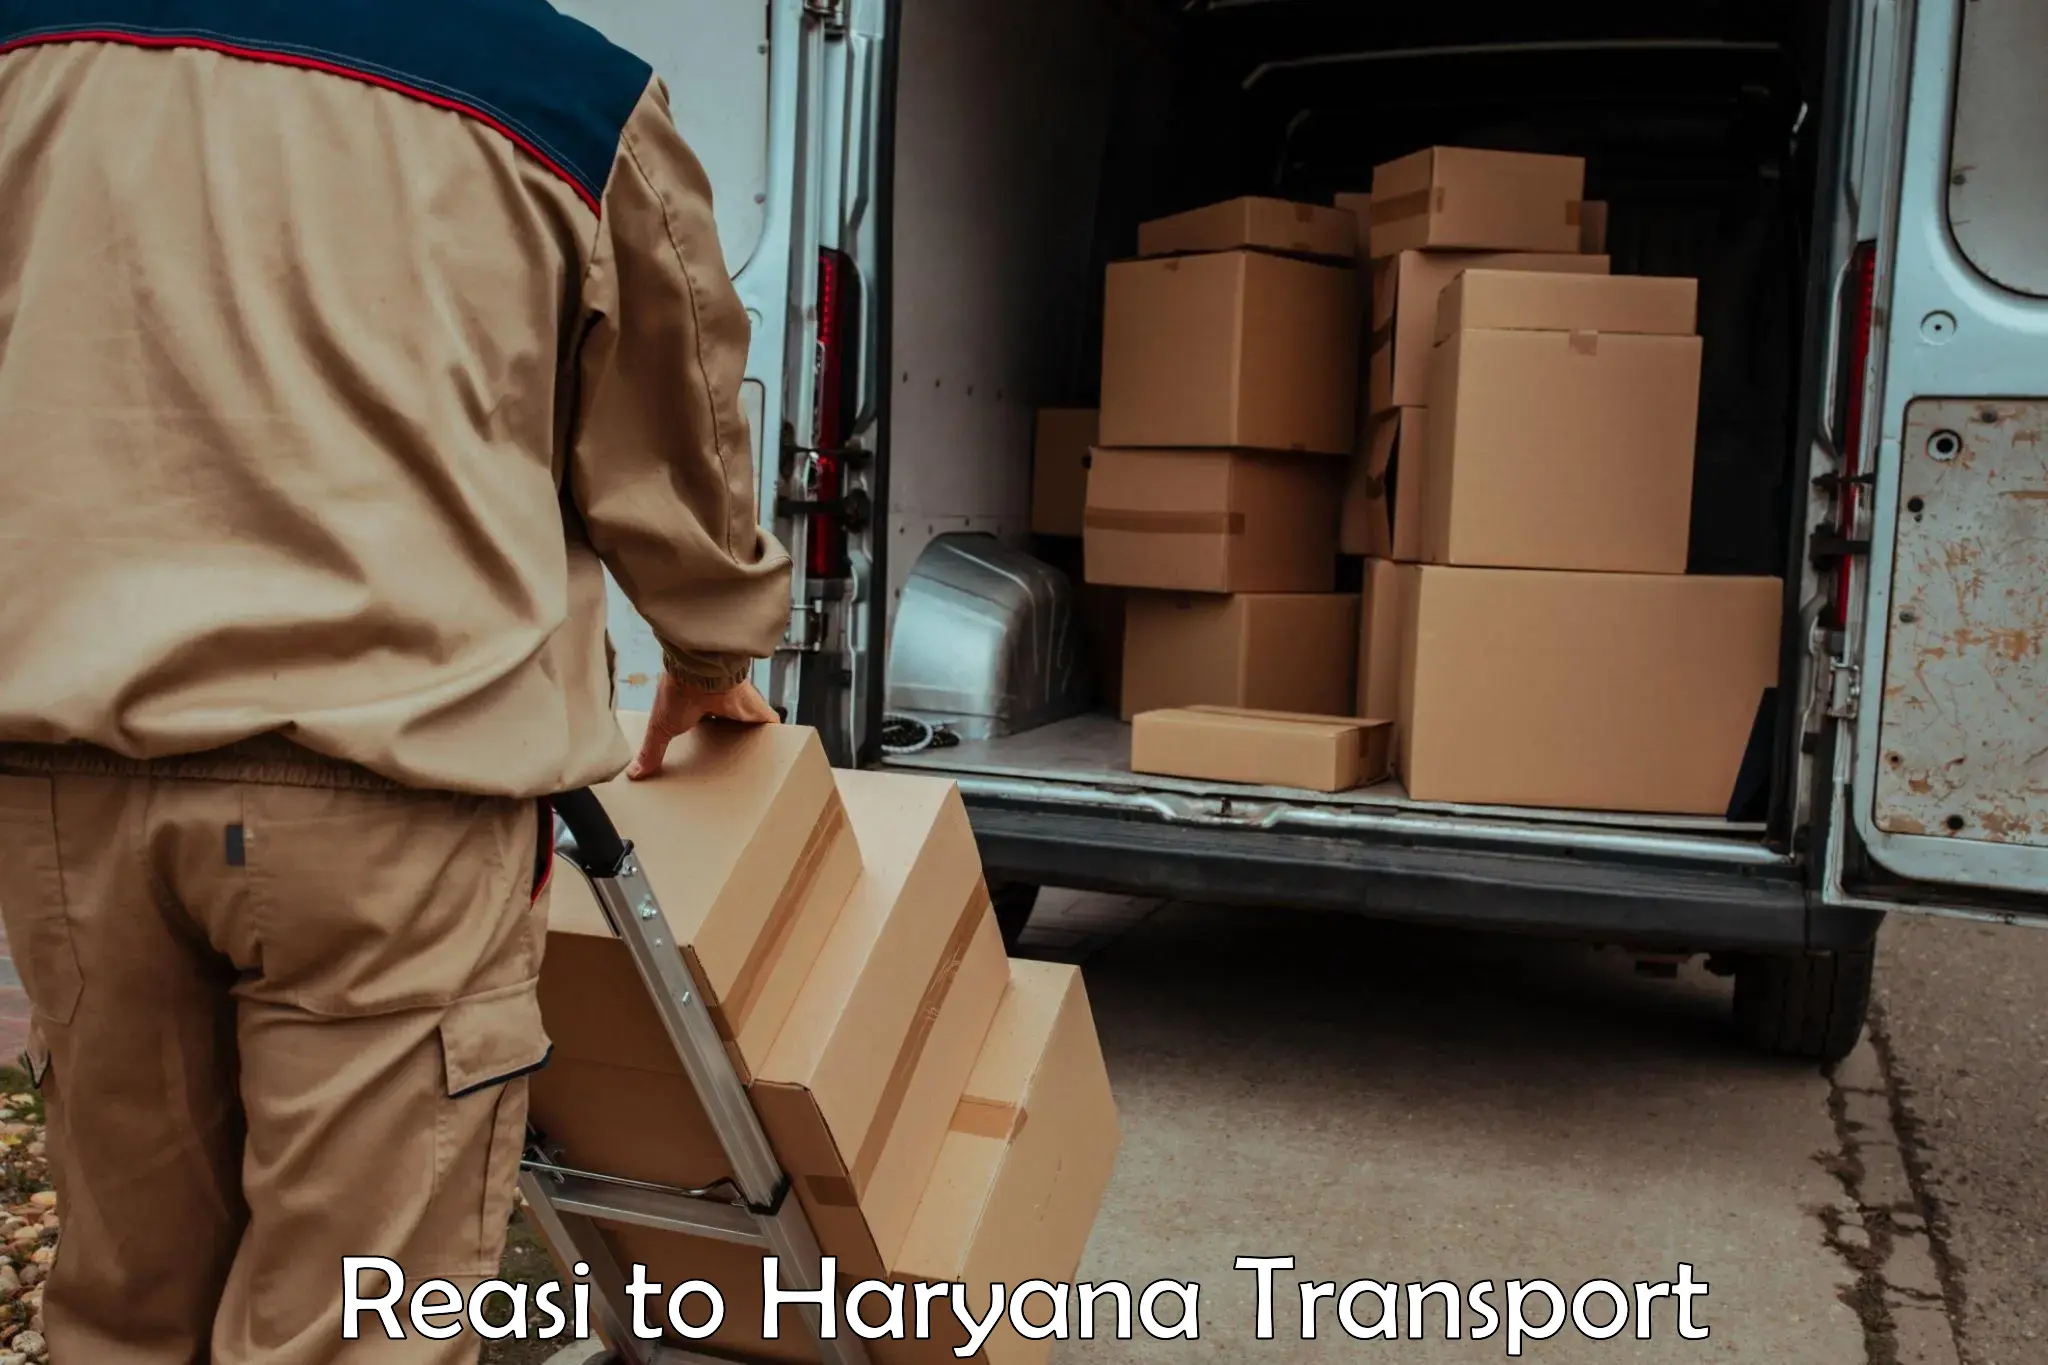 Material transport services Reasi to Gurgaon